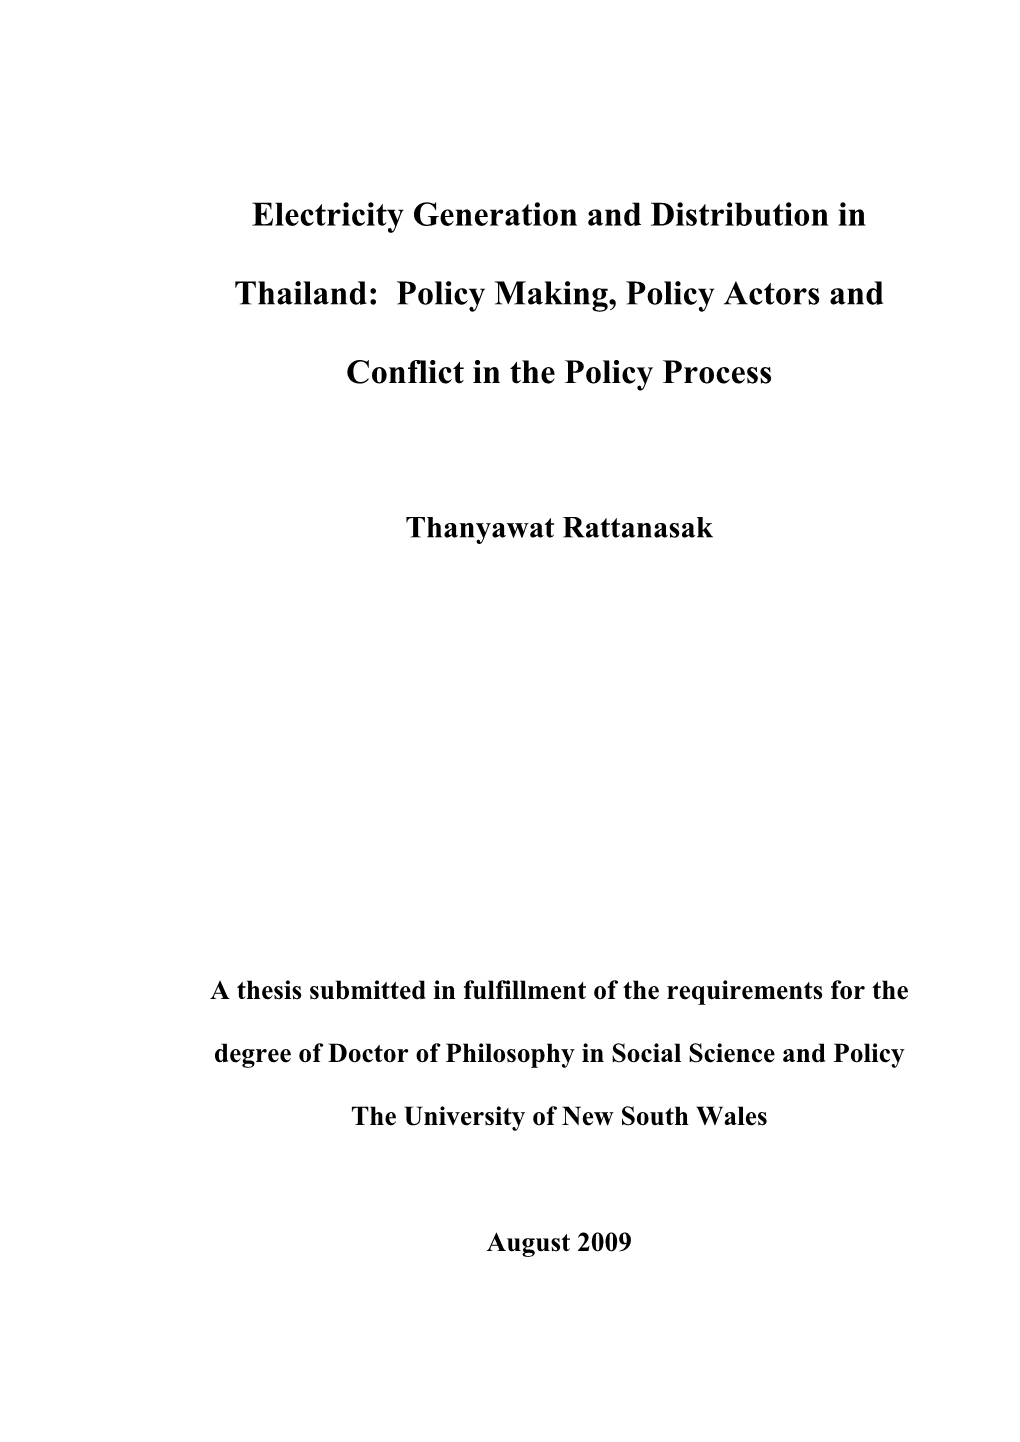 Electricity Generation and Distribution in Thailand: Policy Making, Policy Actors and Conflict in the Policy Process